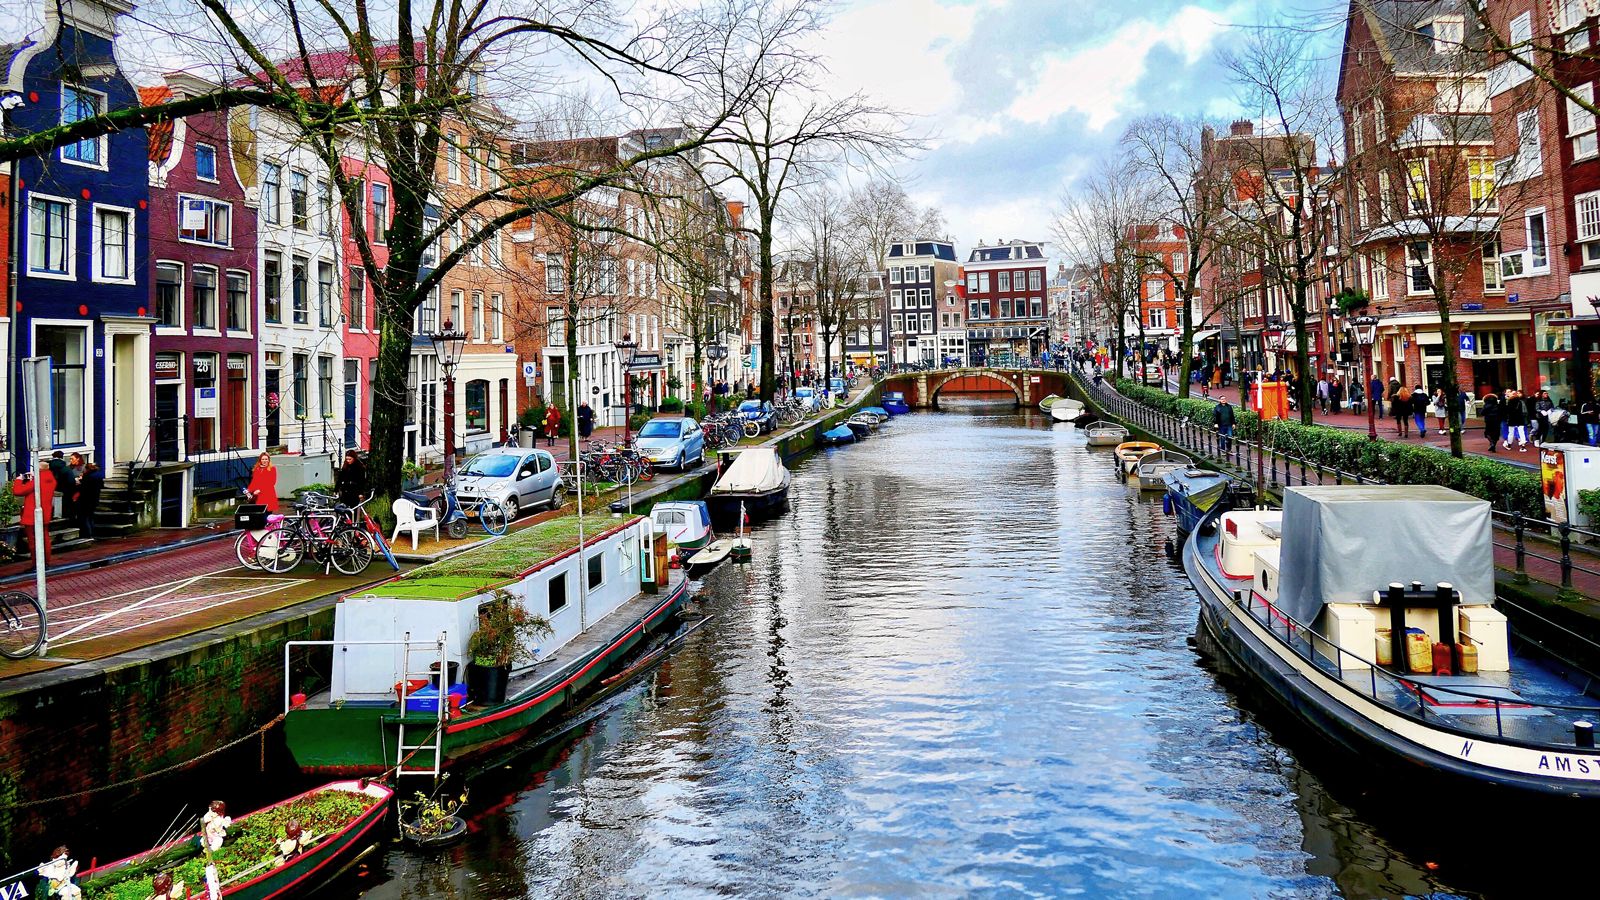 Photo: Boats line the edge of a canal alongside walkways in Amsterdam, Netherlands.